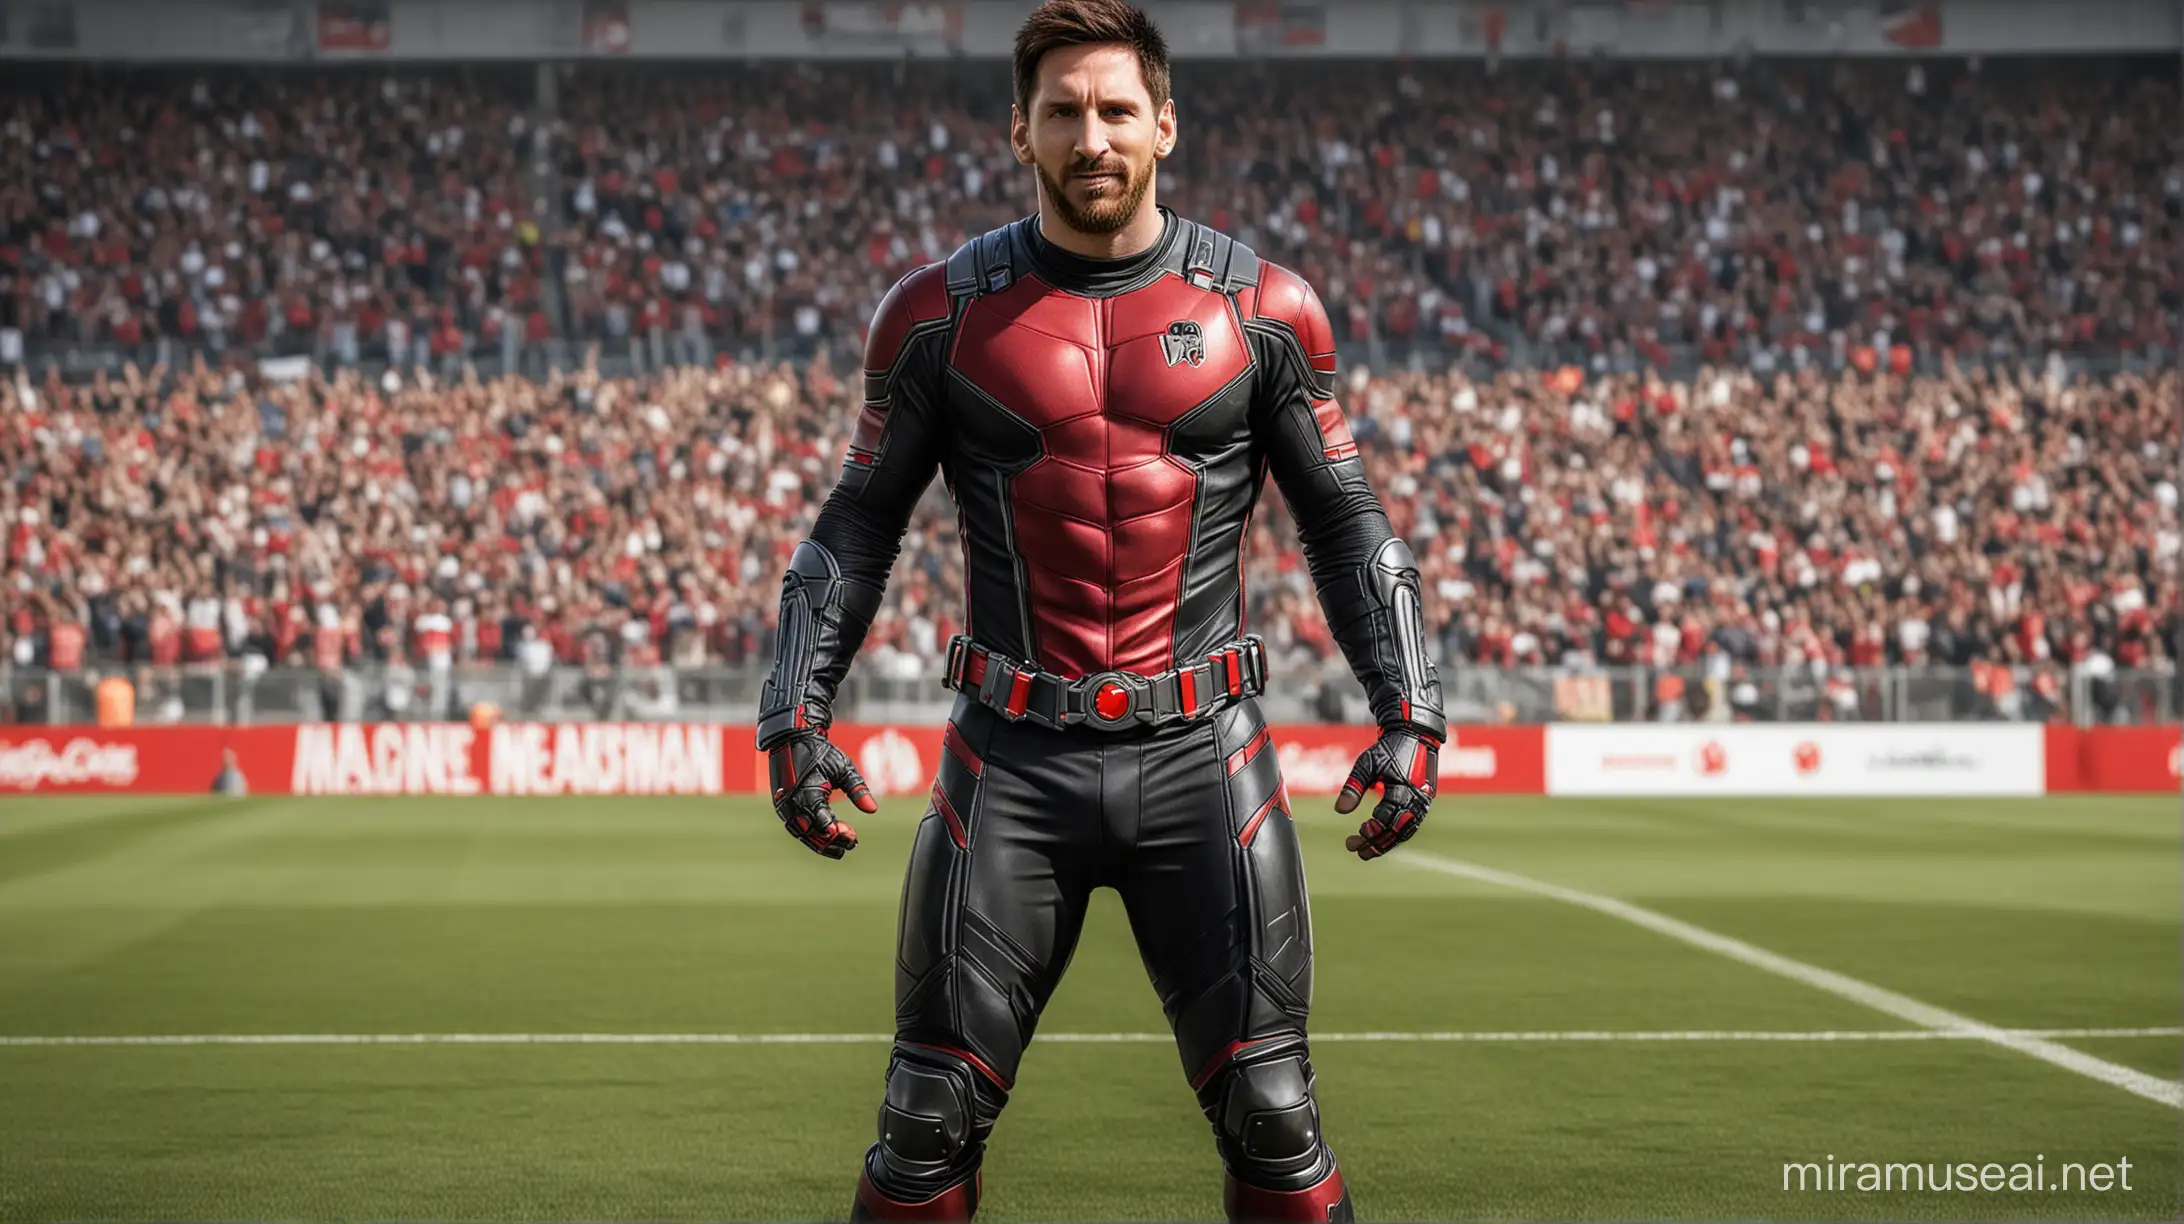 Realistic Photo of Lionel Messi the Soccer player transformes into the comic book superhero Ant-Man, full body, looking Directly at the Camera, So Smiley Face, Wearing Ant-Man costume which is red and black, Standing in the football field.